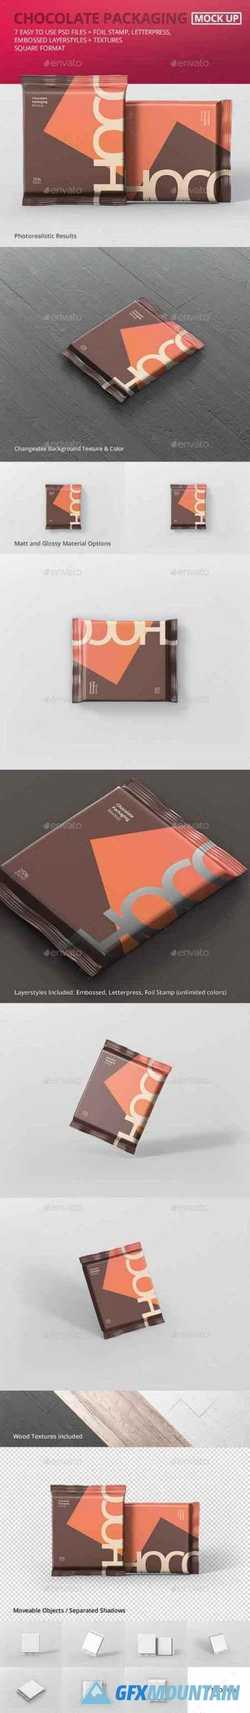 FOIL CHOCOLATE PACKAGING MOCKUP - SQUARE SIZE - 21180593